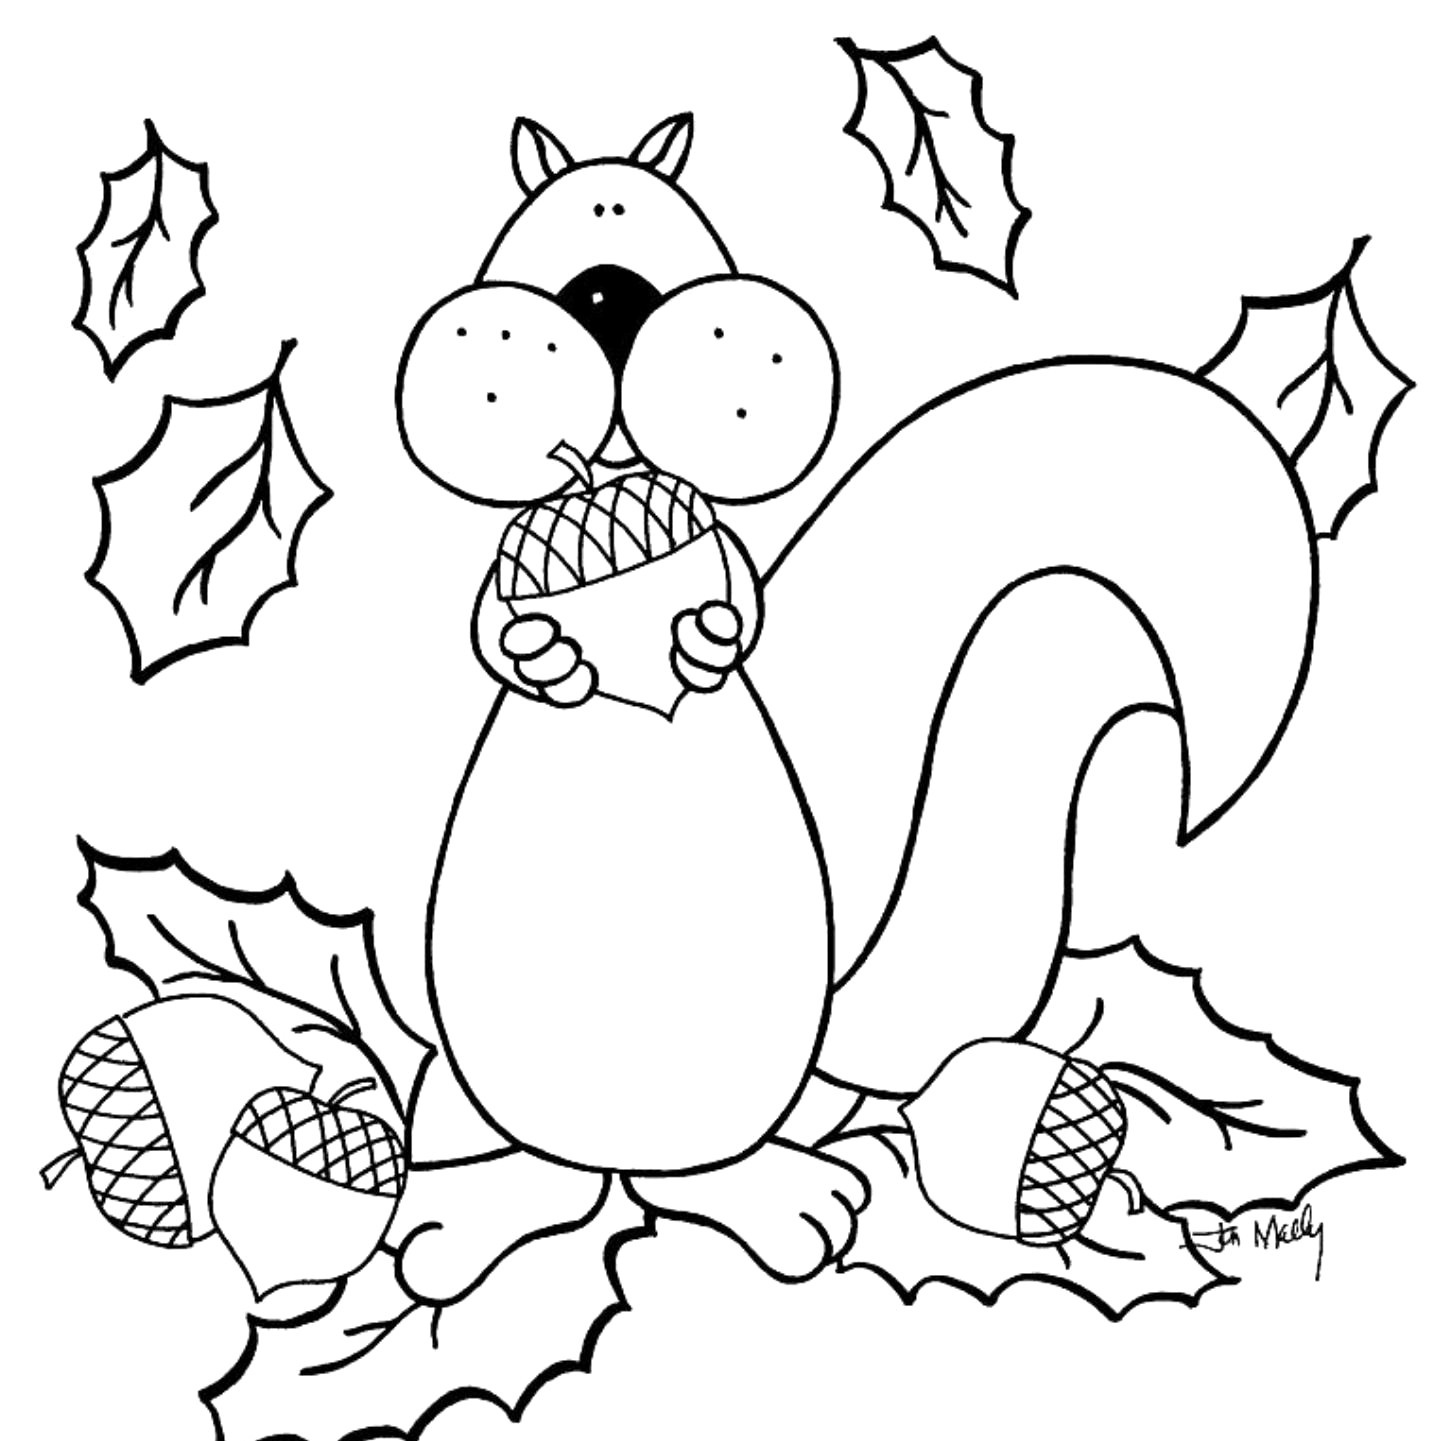 Free Printable Fall Coloring Pages For Kids - Best Coloring Pages - Fall Printable Coloring Pages Free